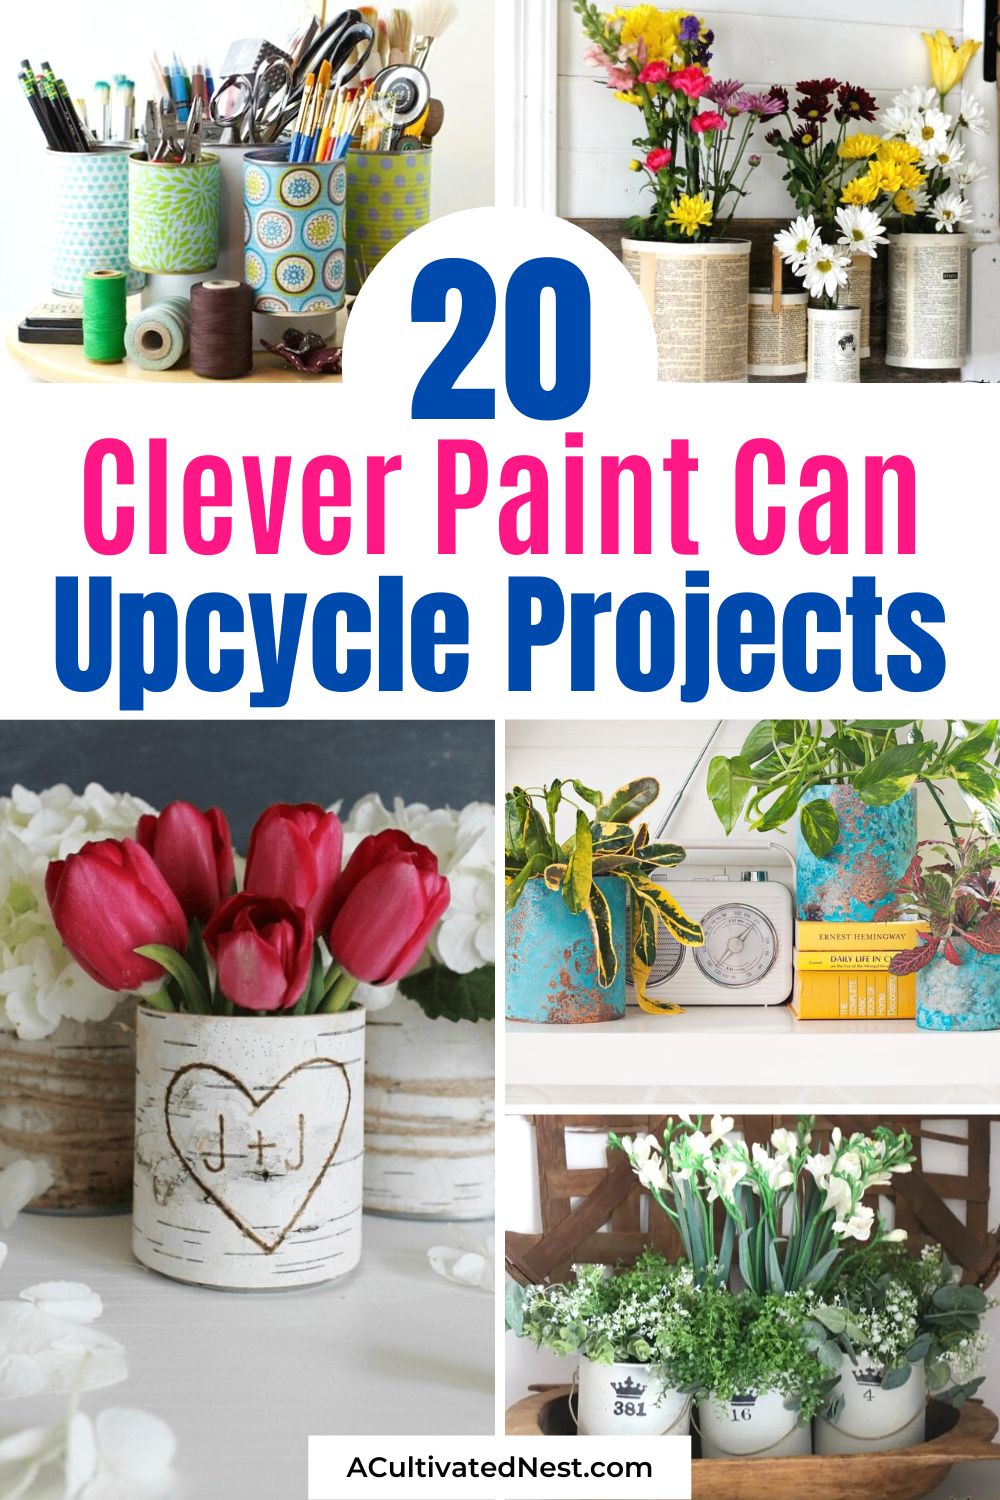 20 Clever Paint Can Upcycles- Don't throw out the paint cans you have leftover from a project, repurpose them! Here are 20 clever paint can upcycle projects to try! | #diyProjects #crafts #upcycling #repurpose #ACultivatedNest